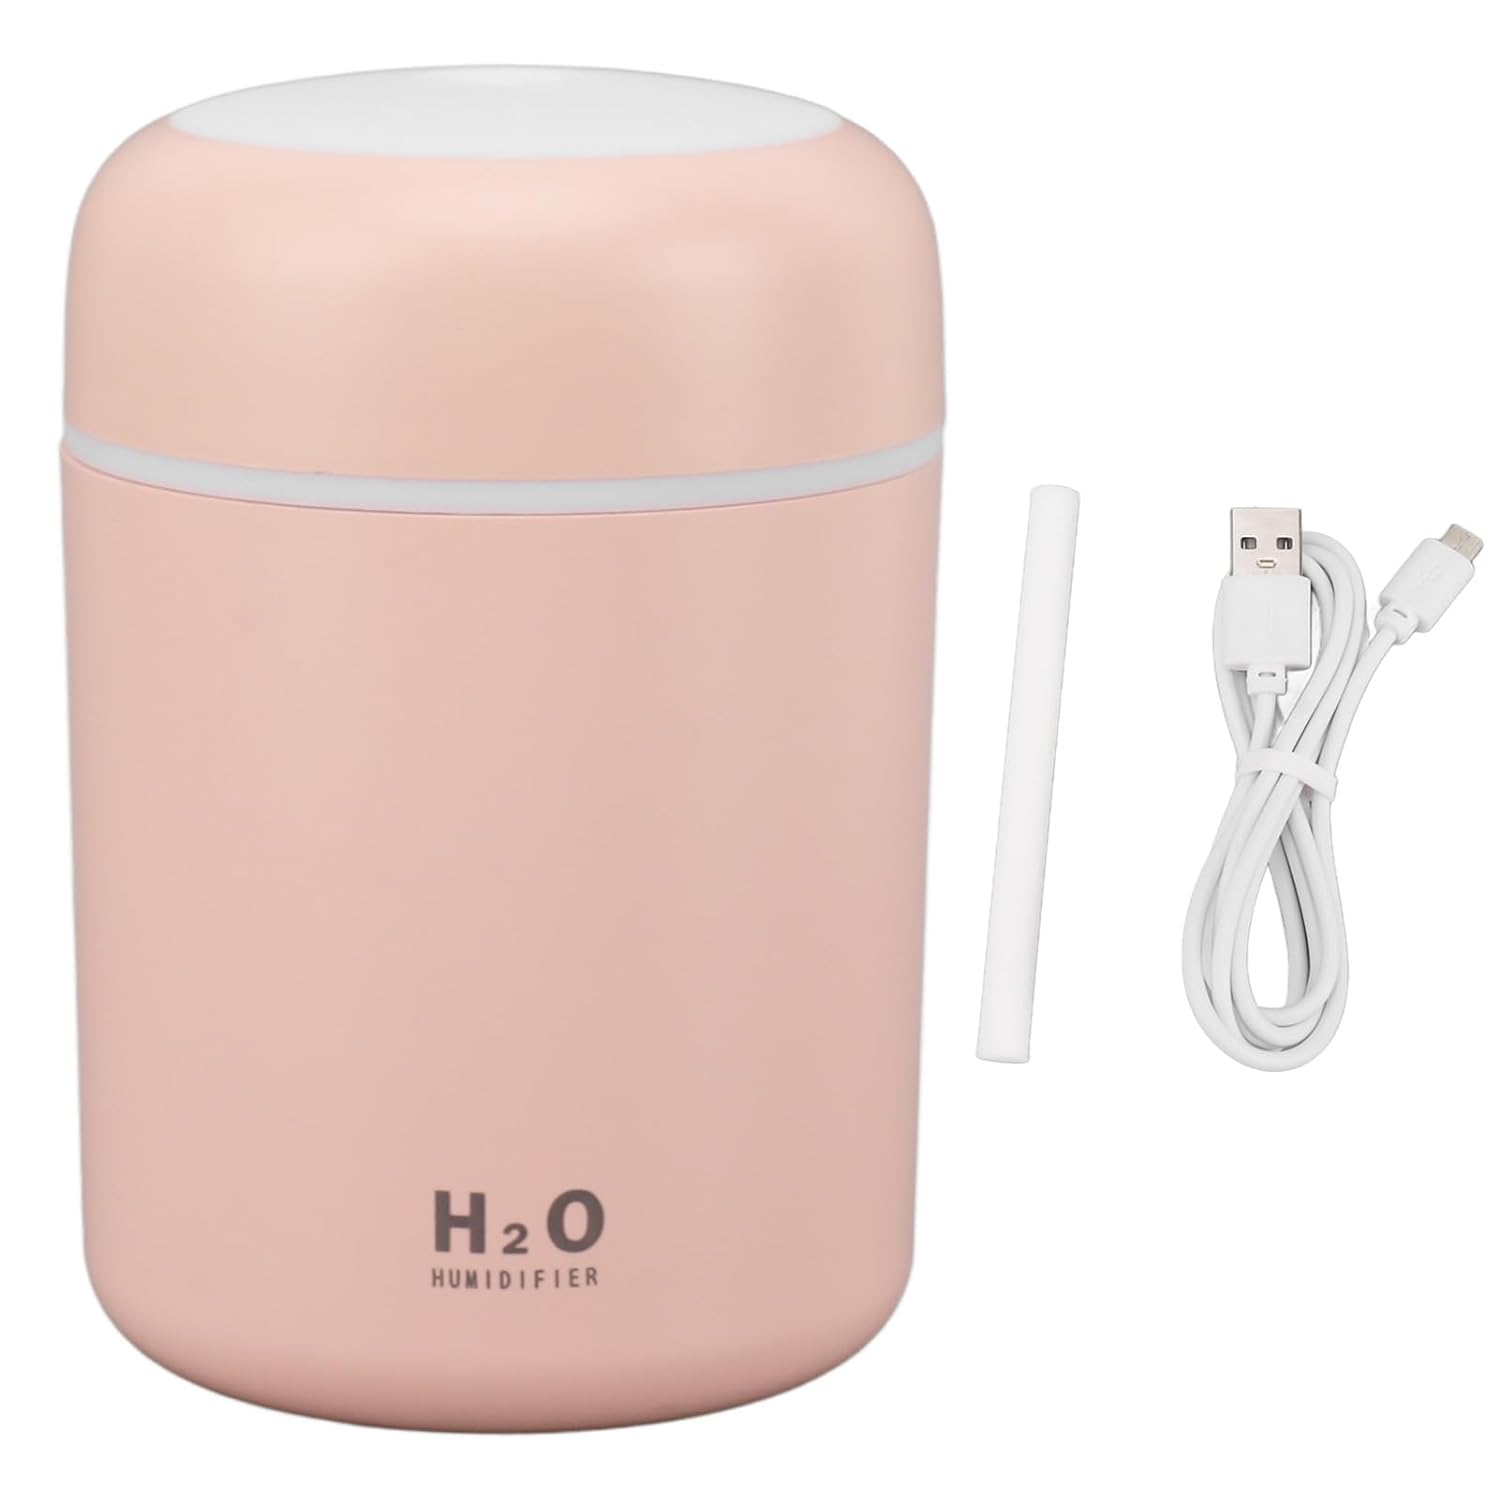 Colorful Cool Mini Humidifier,USB Portable Car Air Humidifier with Colorful Lighting Air Freshener Mute Aroma Diffuser Desktop Humidifier for Home Office Bedroom Car(Pink)